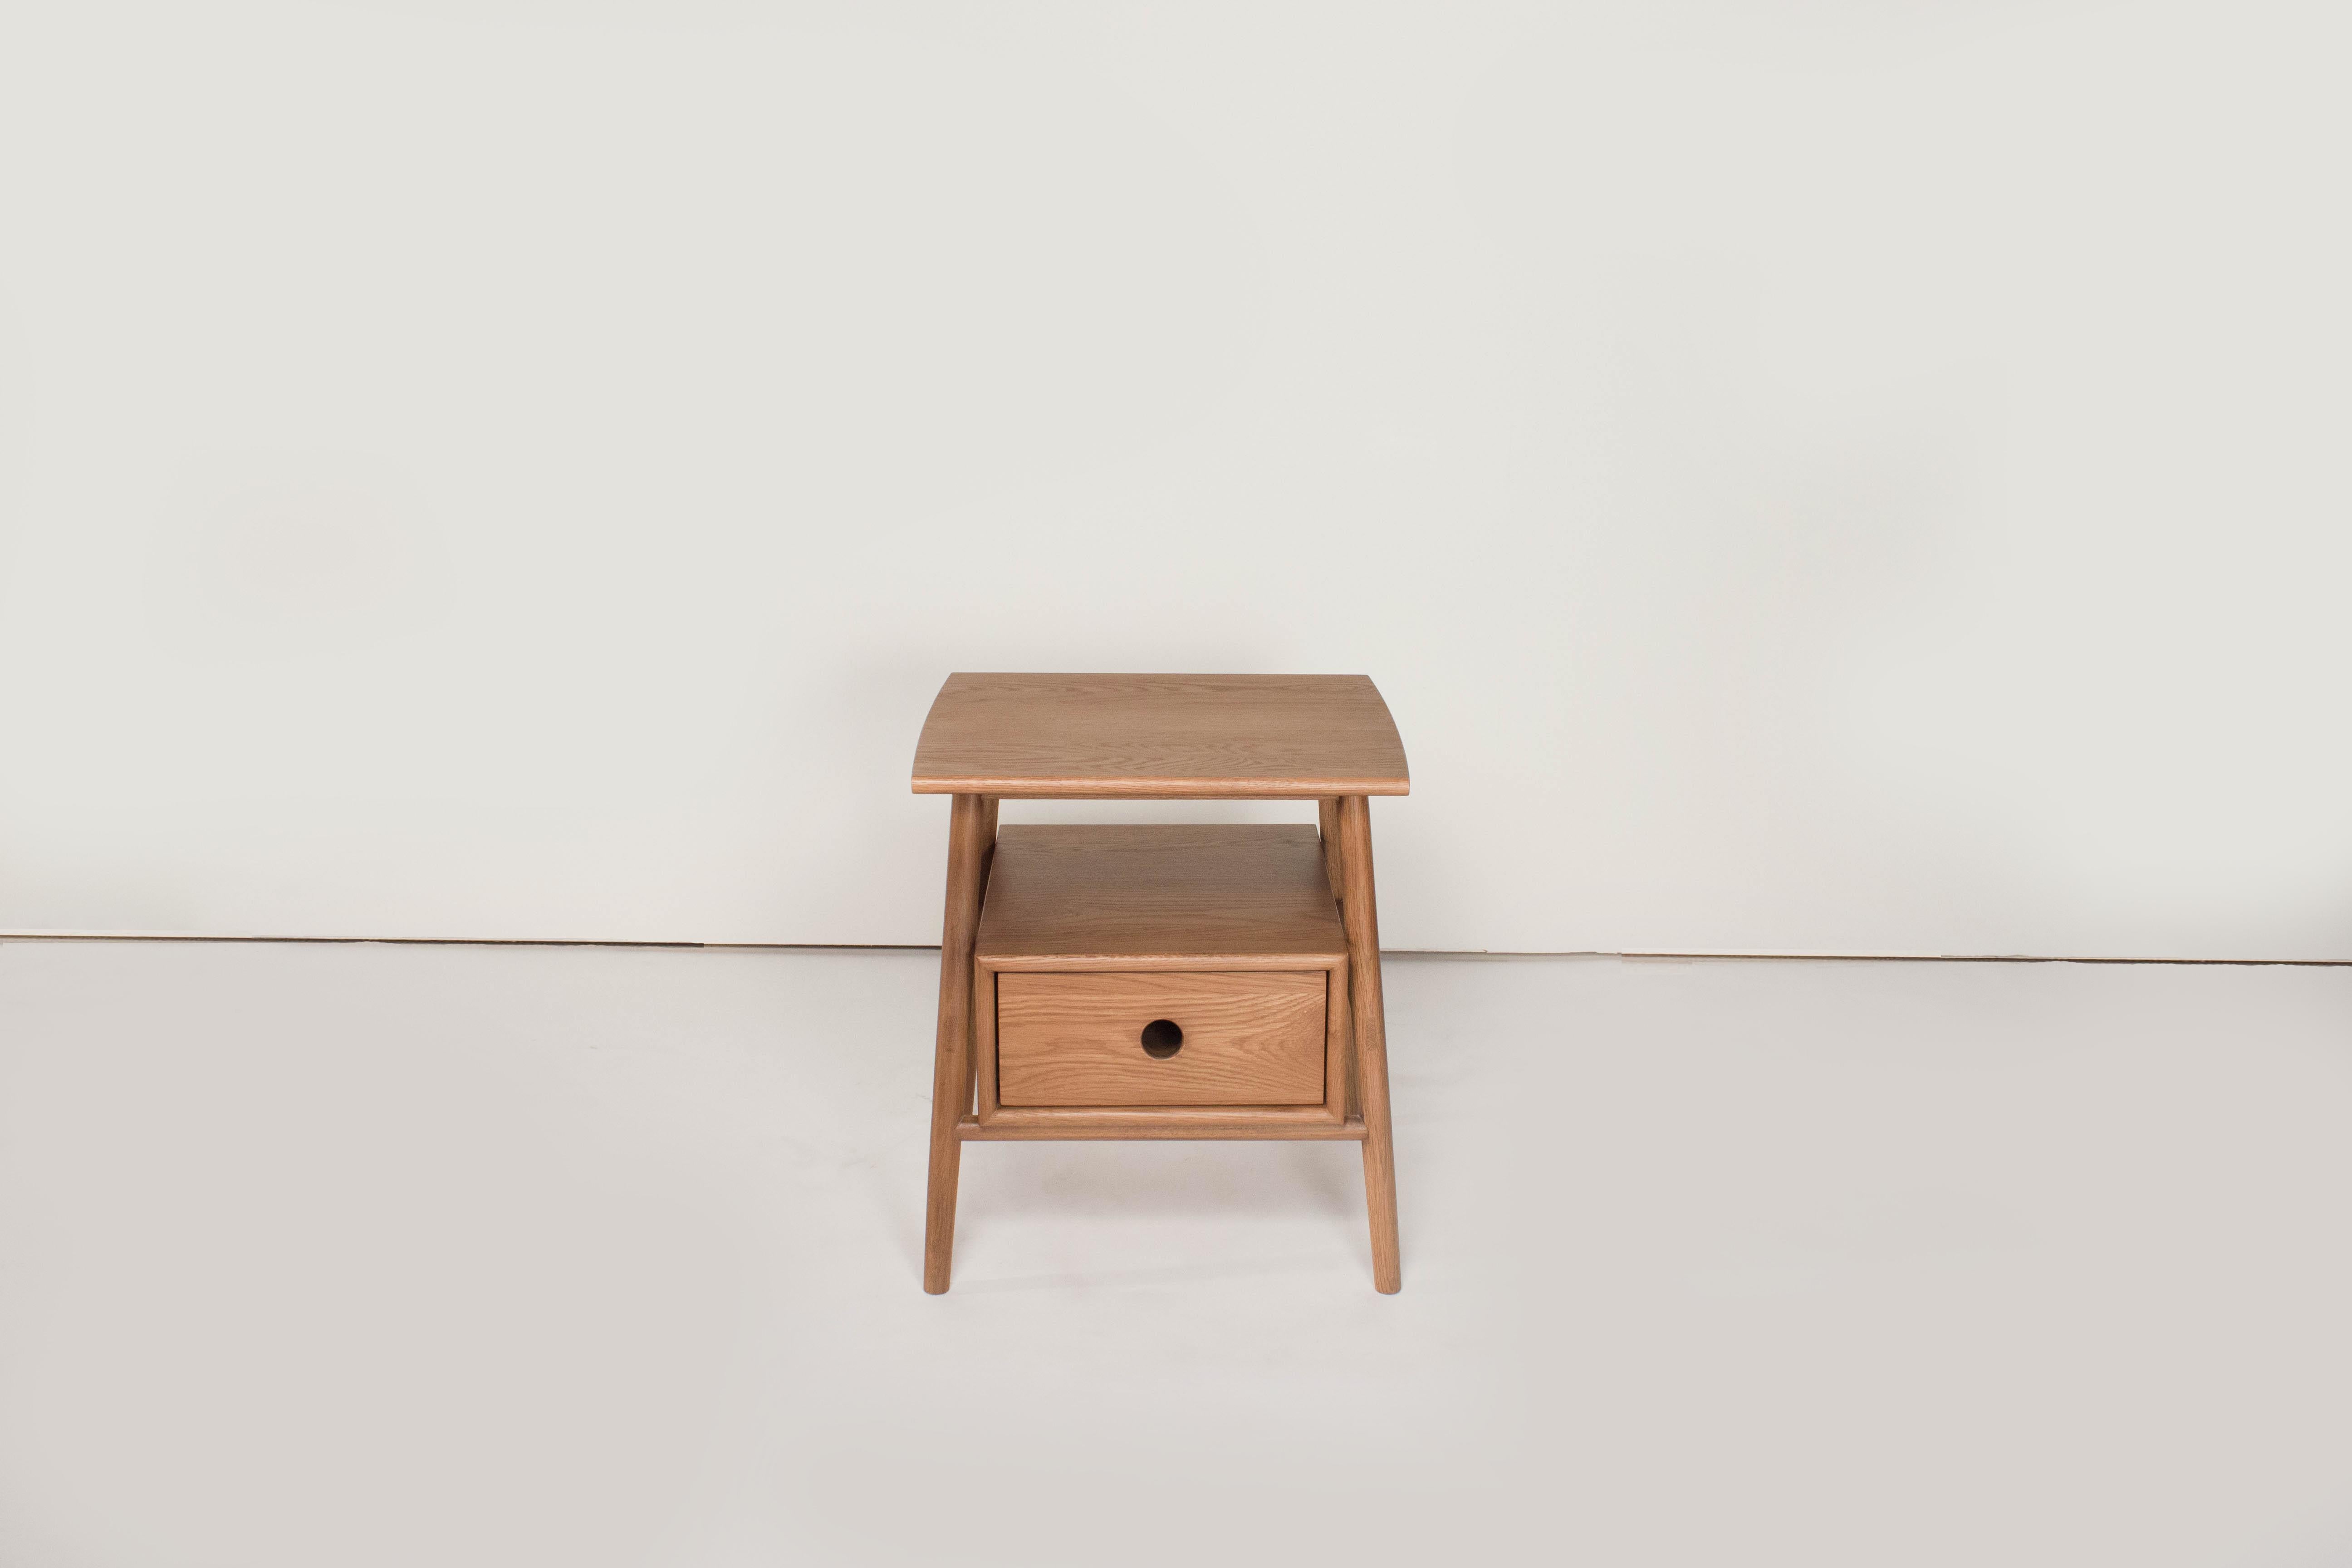 Sun at six is a Brooklyn design studio. We work with traditional Chinese joinery masters to handcraft our pieces using traditional joinery. The sitka side table features traditional joinery throughout.

• Solid white oak
• Tung oil finish
•